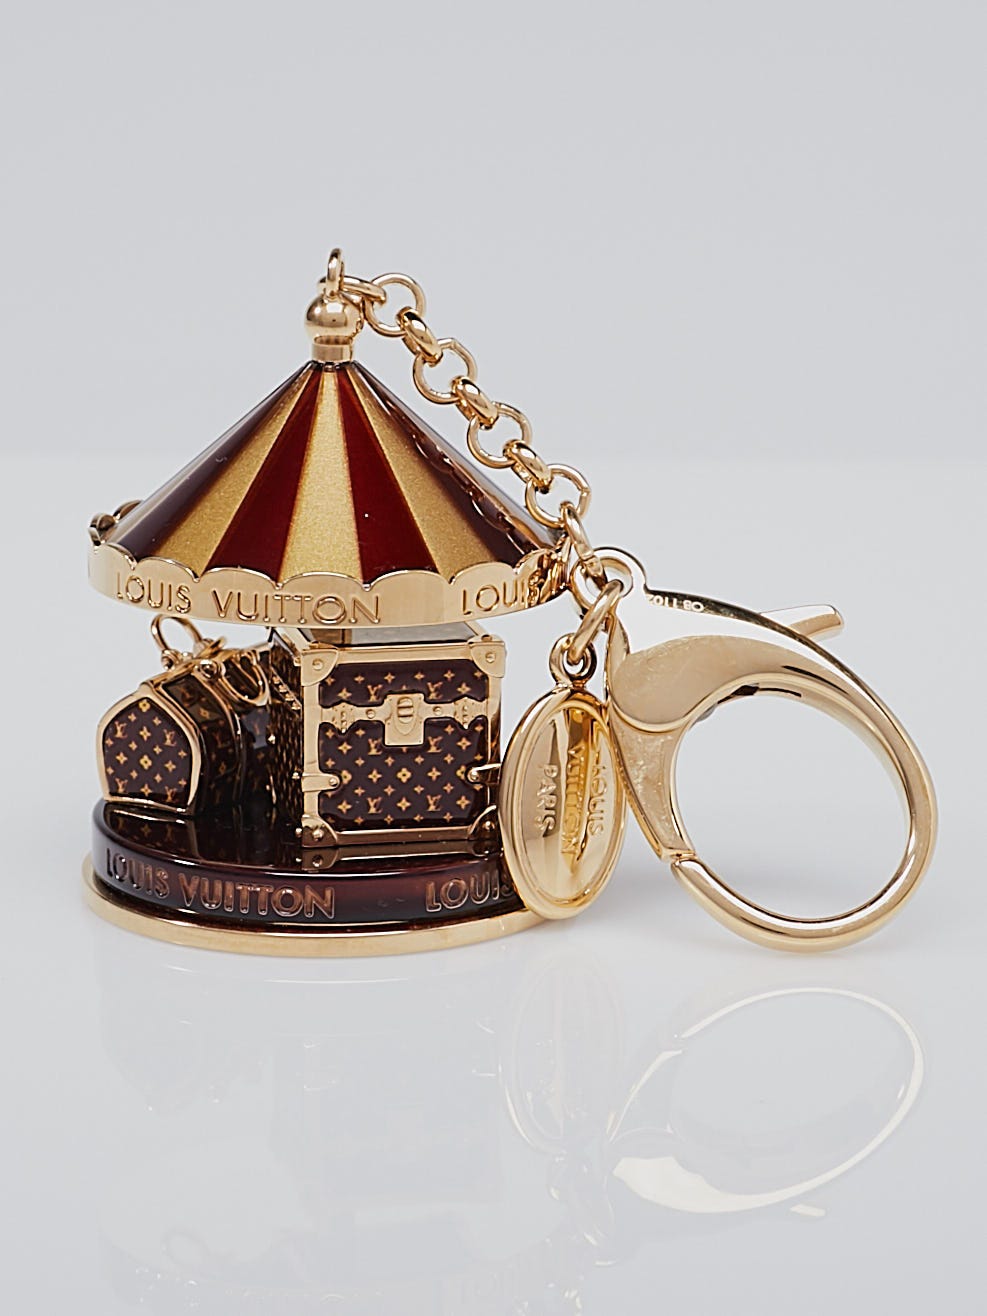 Monogram bag charm Louis Vuitton Brown in Other - 22842071